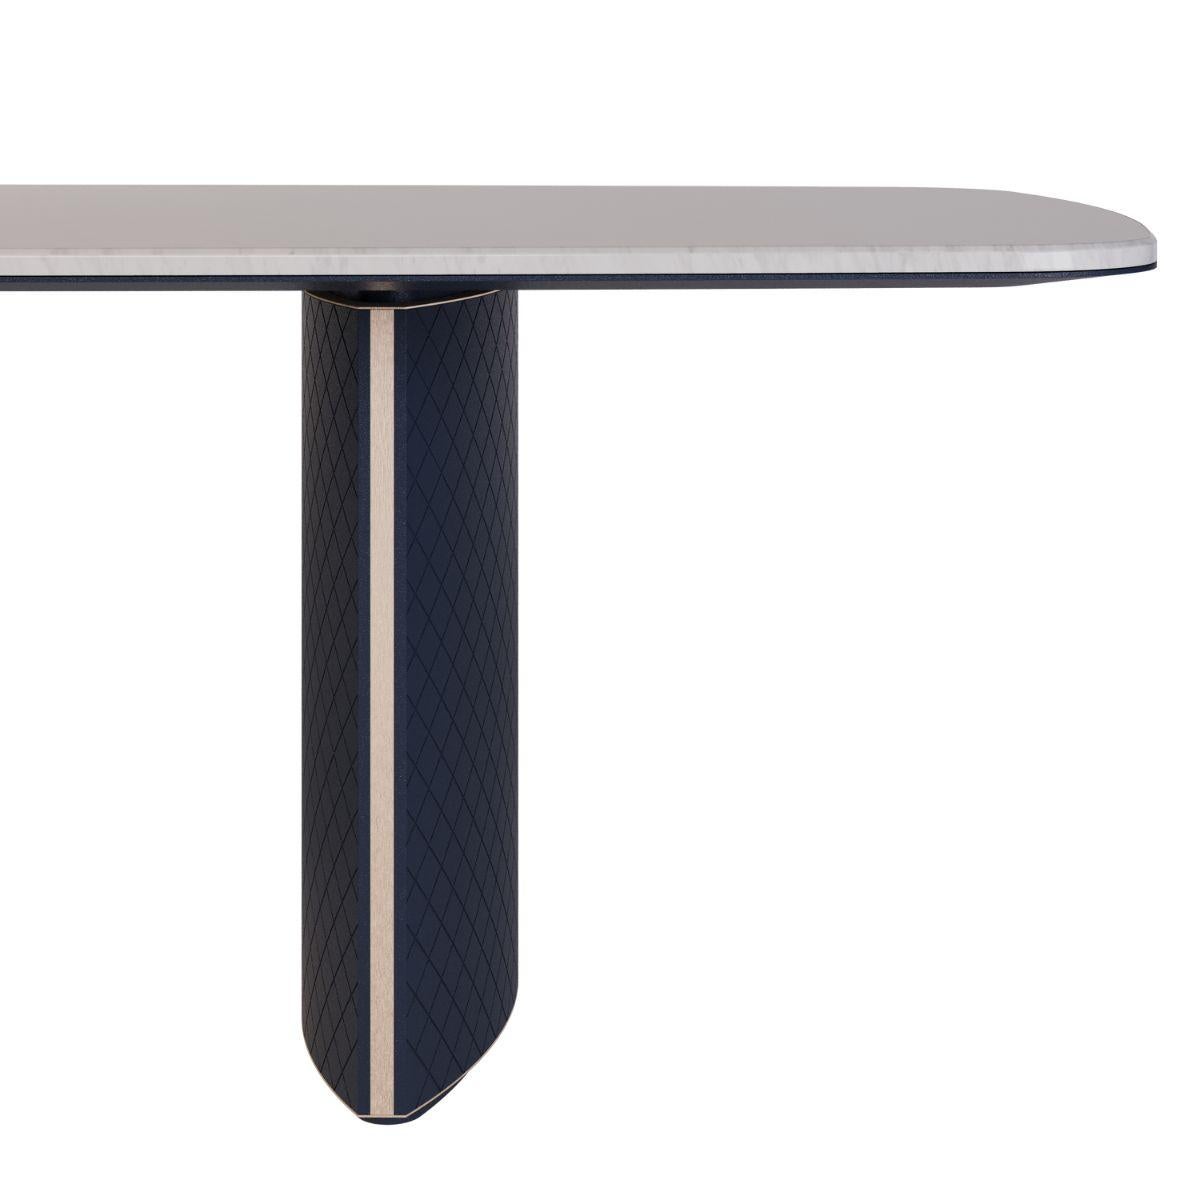 Modern Marble and Fiberglass Outdoor Dining Table Blue Legs With Gold Details For Sale